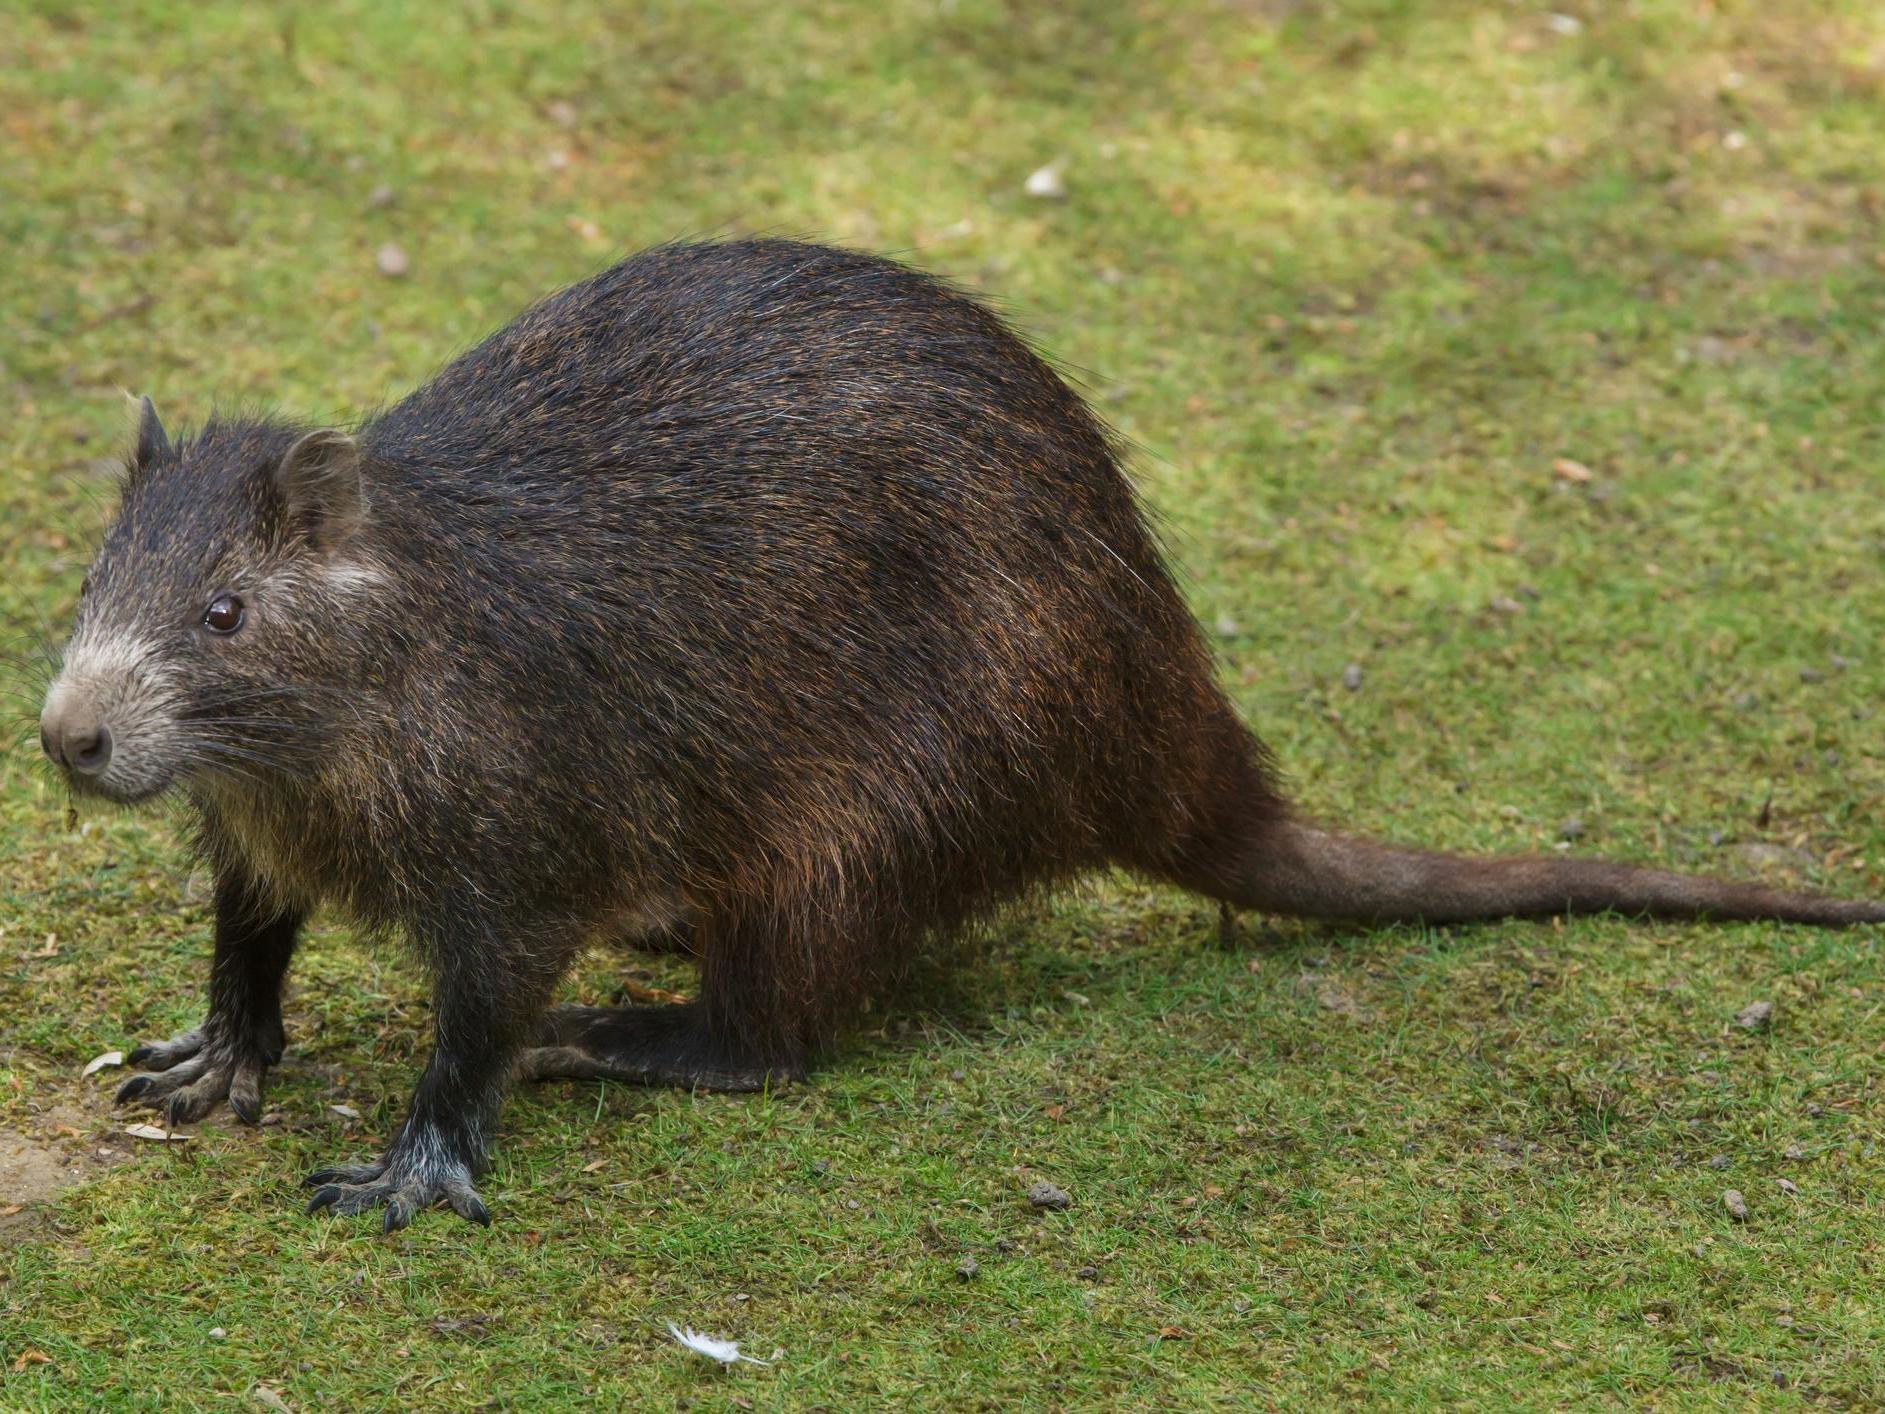 The closest living relative of the newly discovered species is Desmarest's hutia, endemic to Cuba